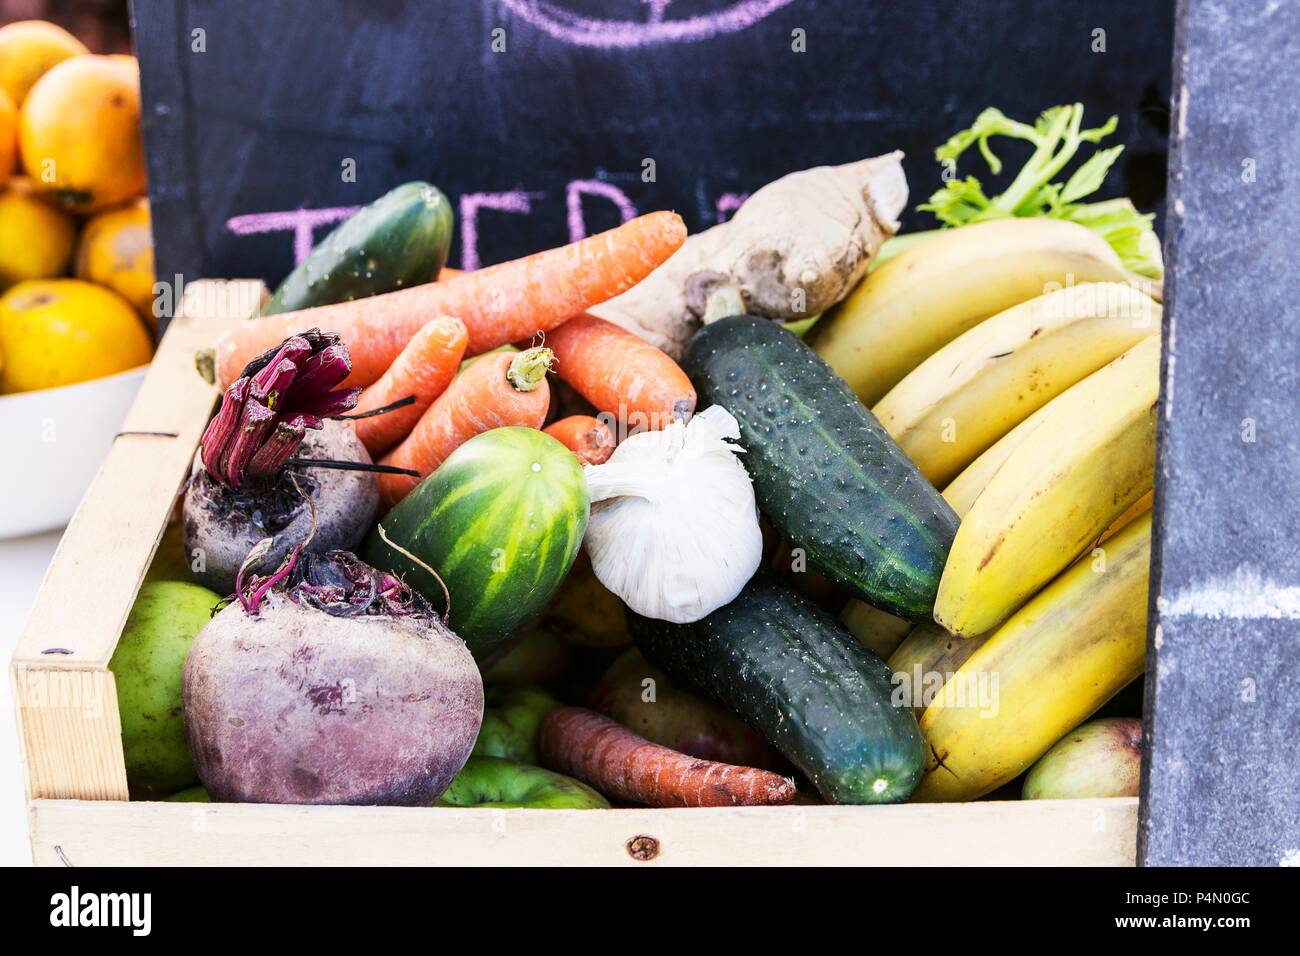 A wooden basket of different vegetables and fruits Stock Photo